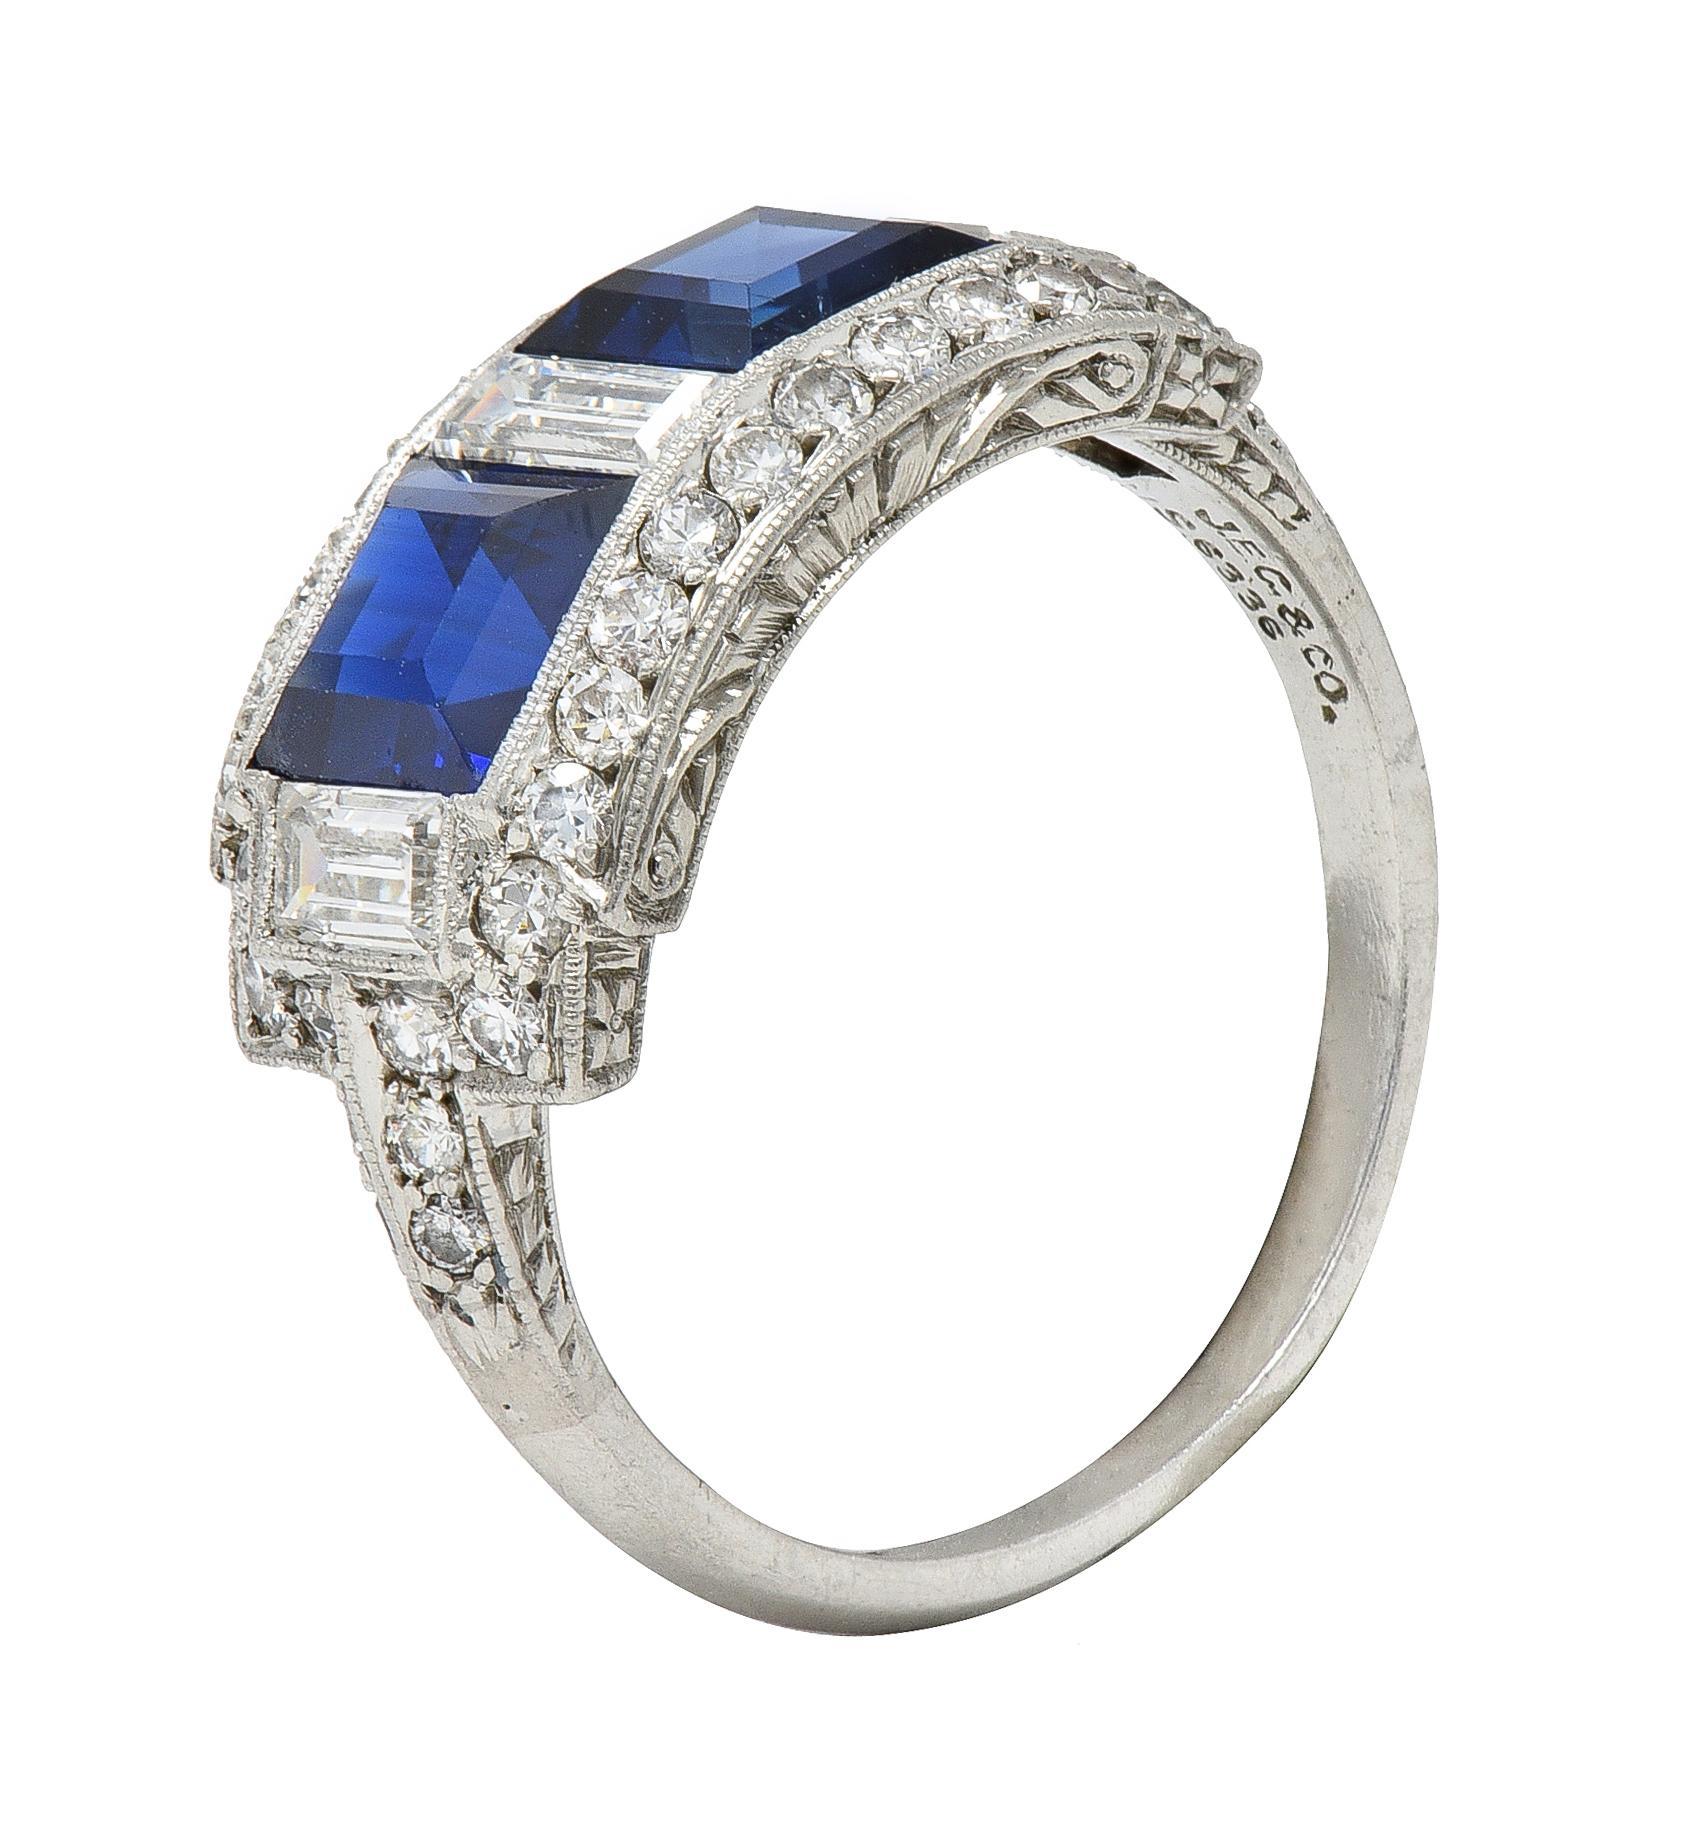 Featuring two square step-cut sapphires weighing approximately 1.74 carats total - transparent medium blue in color
Natural Cambodian in origin with no indications of heat treatment - channel set 
Alternating with baguette cut diamonds weighing